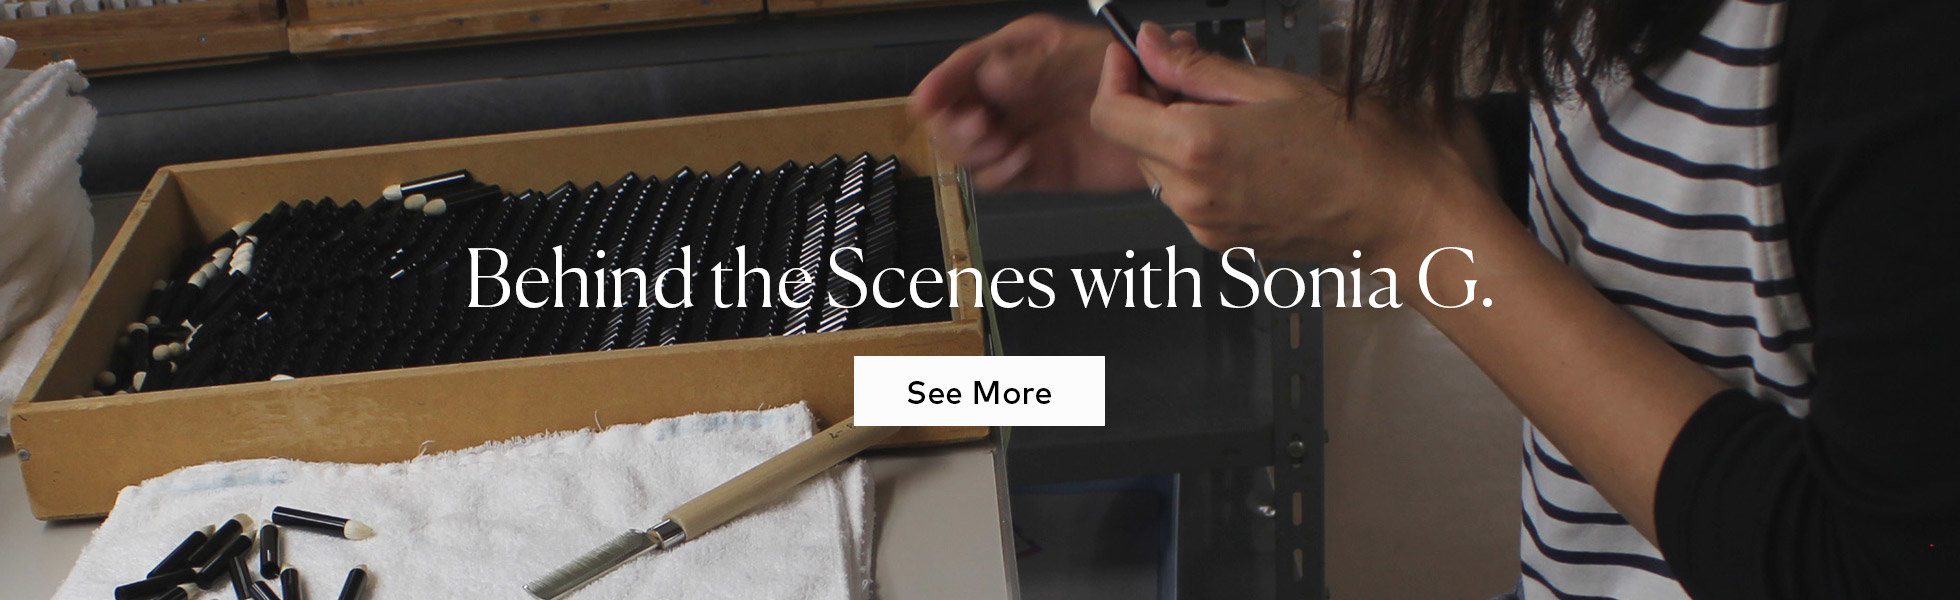 See Behind the Scenes with Sonia G.